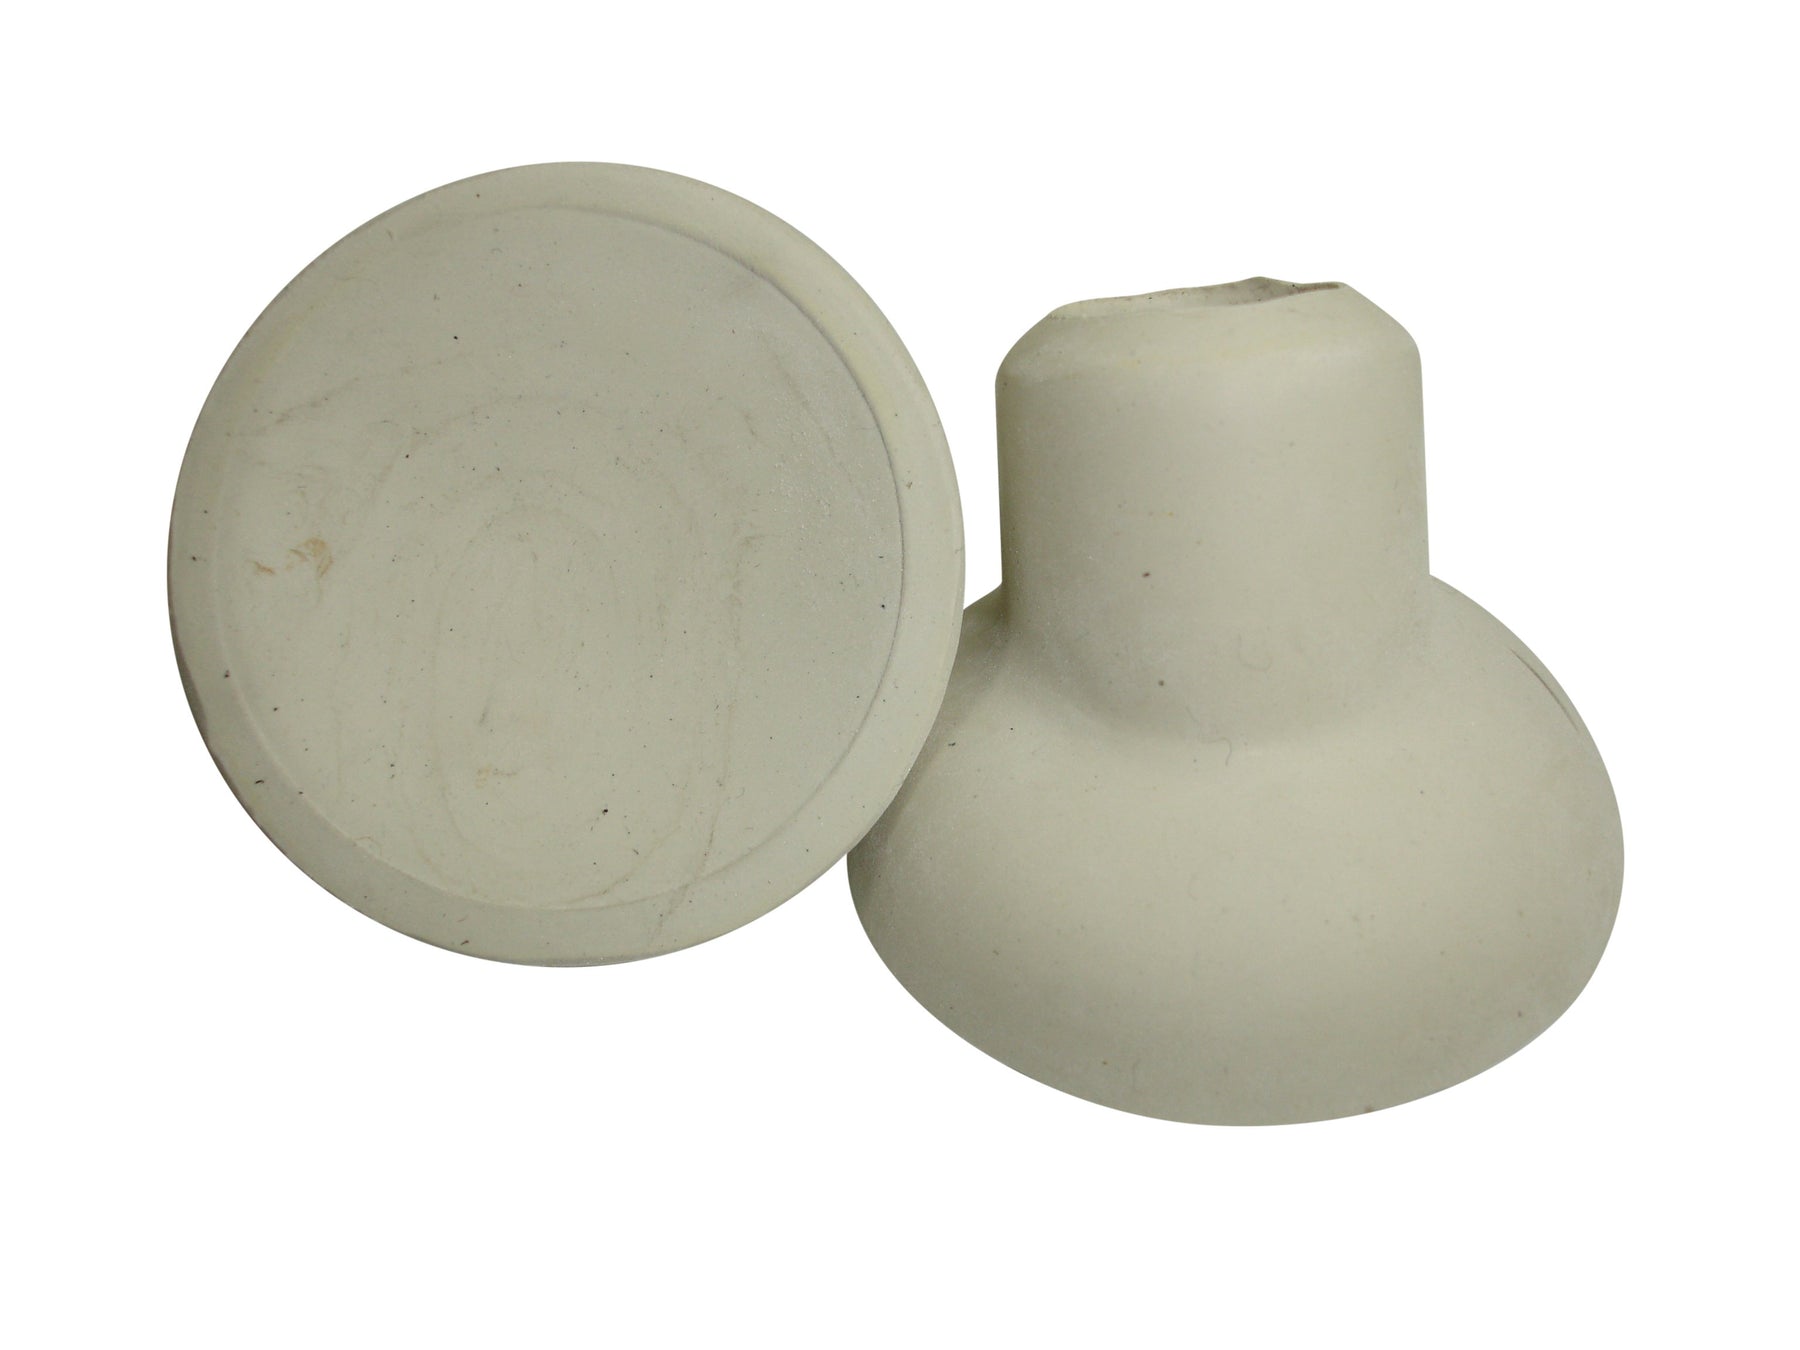 Vespa Lambretta Front Carrier Replacement Rubber Cup/Buffer - White 19mm Pair